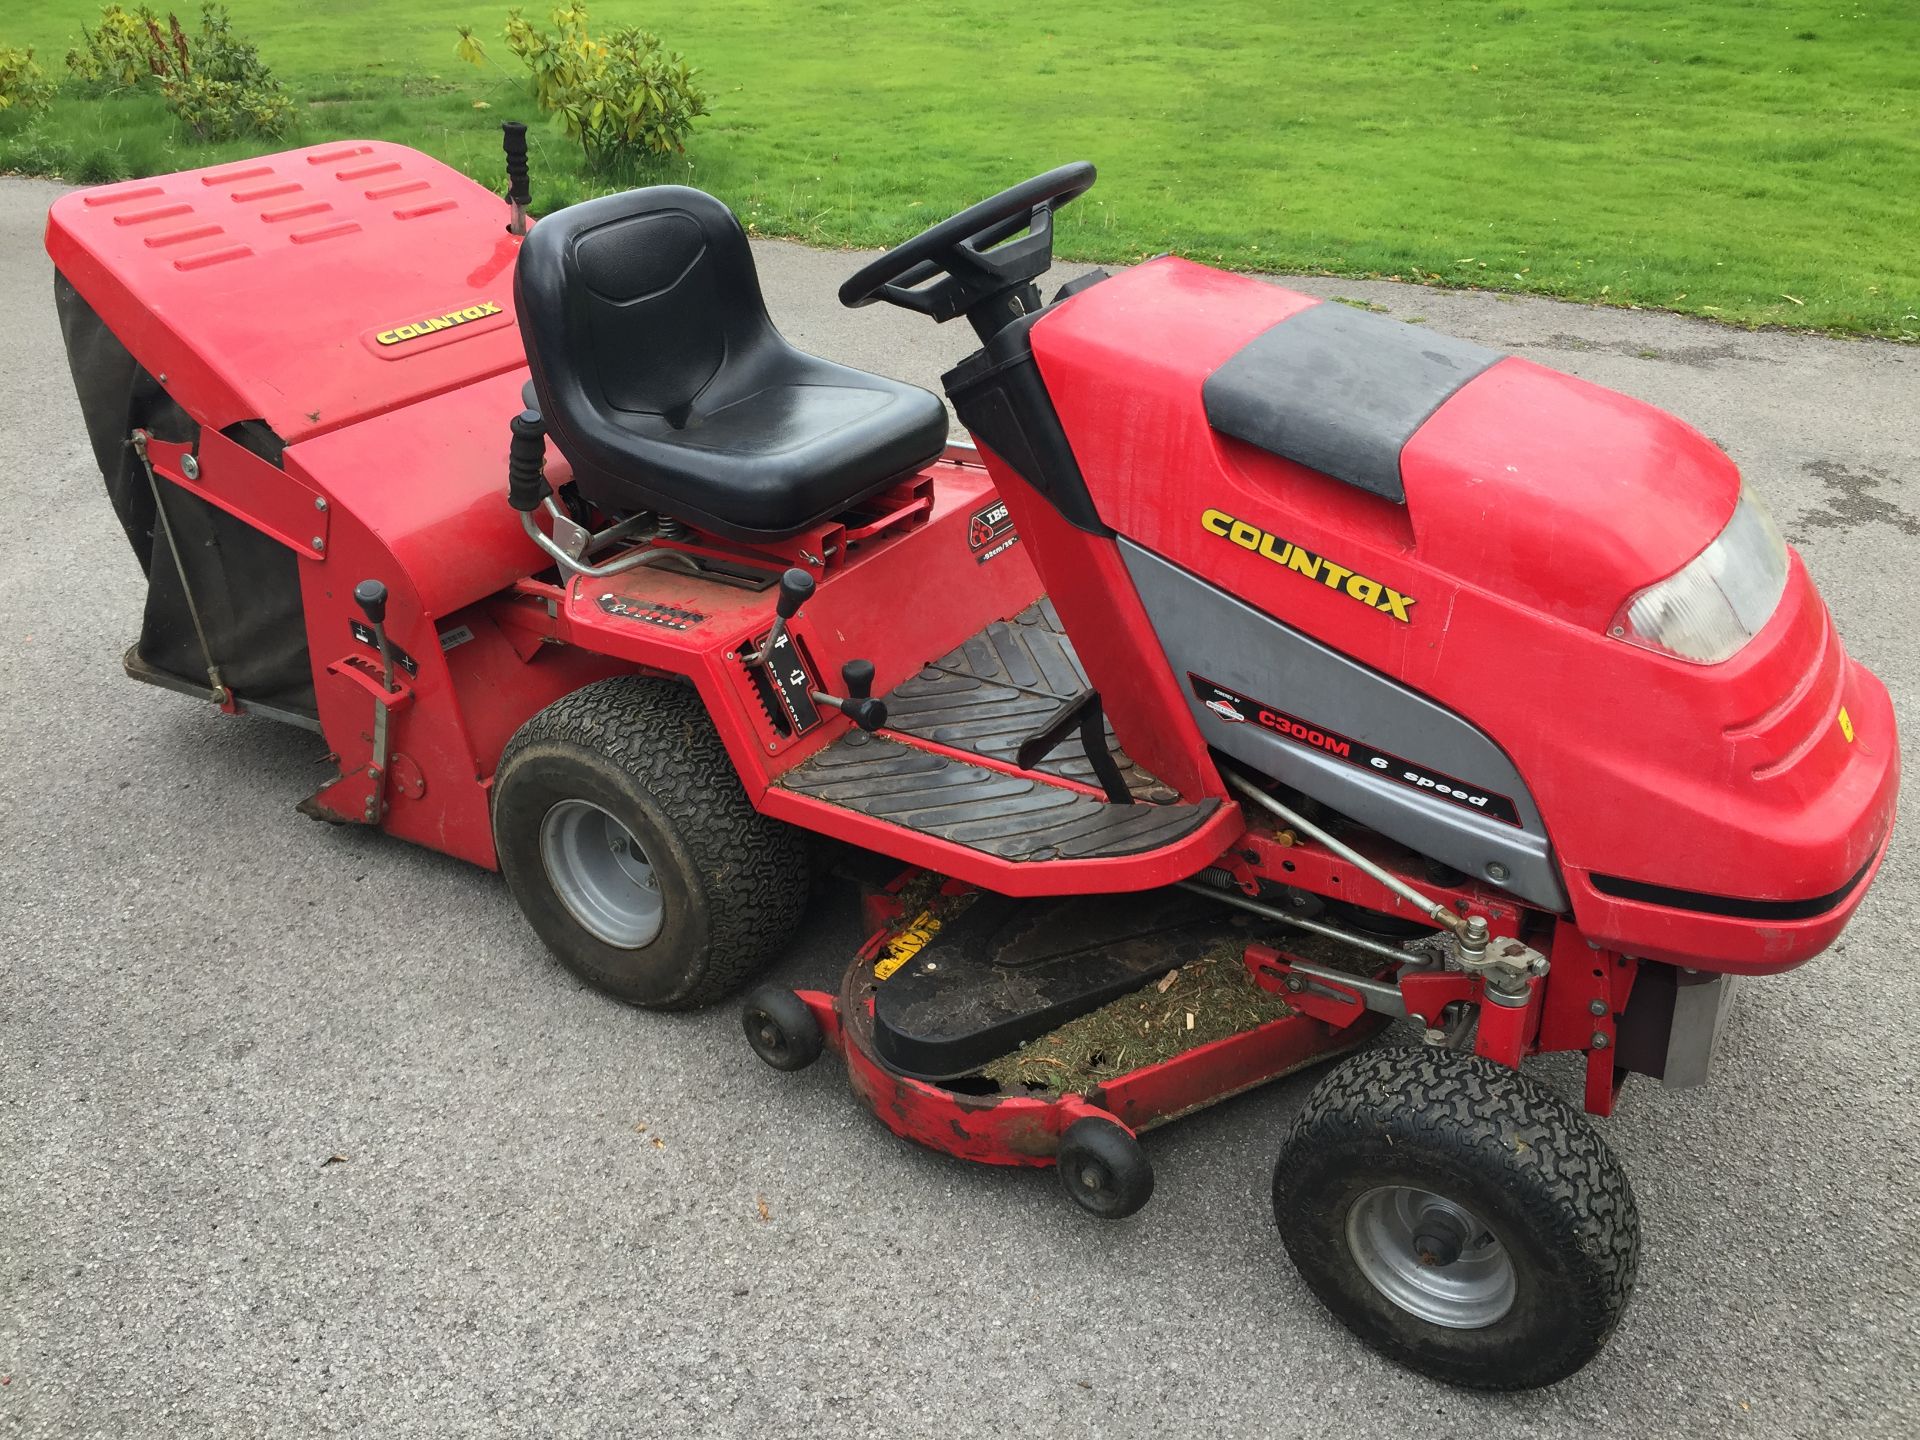 COUNTAX RIDE-ON MOWER C330M IN GOOD WROKING ORDER - Image 5 of 13